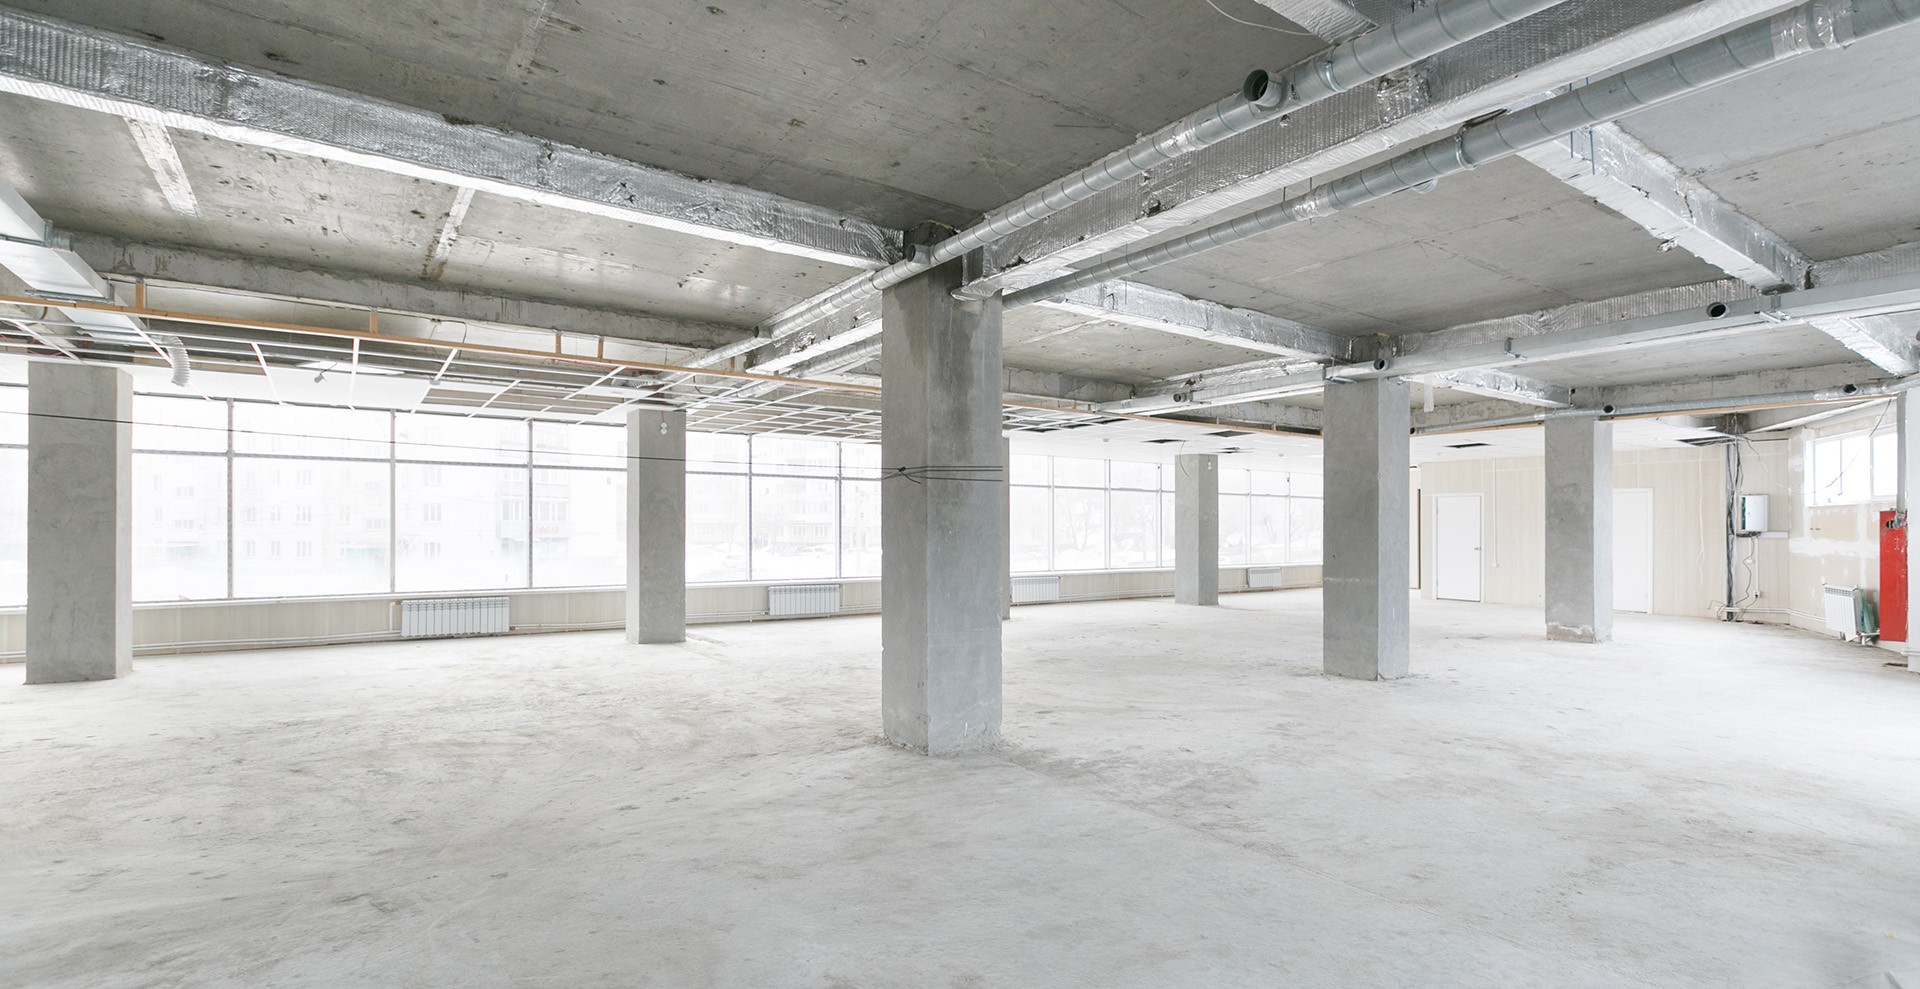 empty concrete open building space with large posts